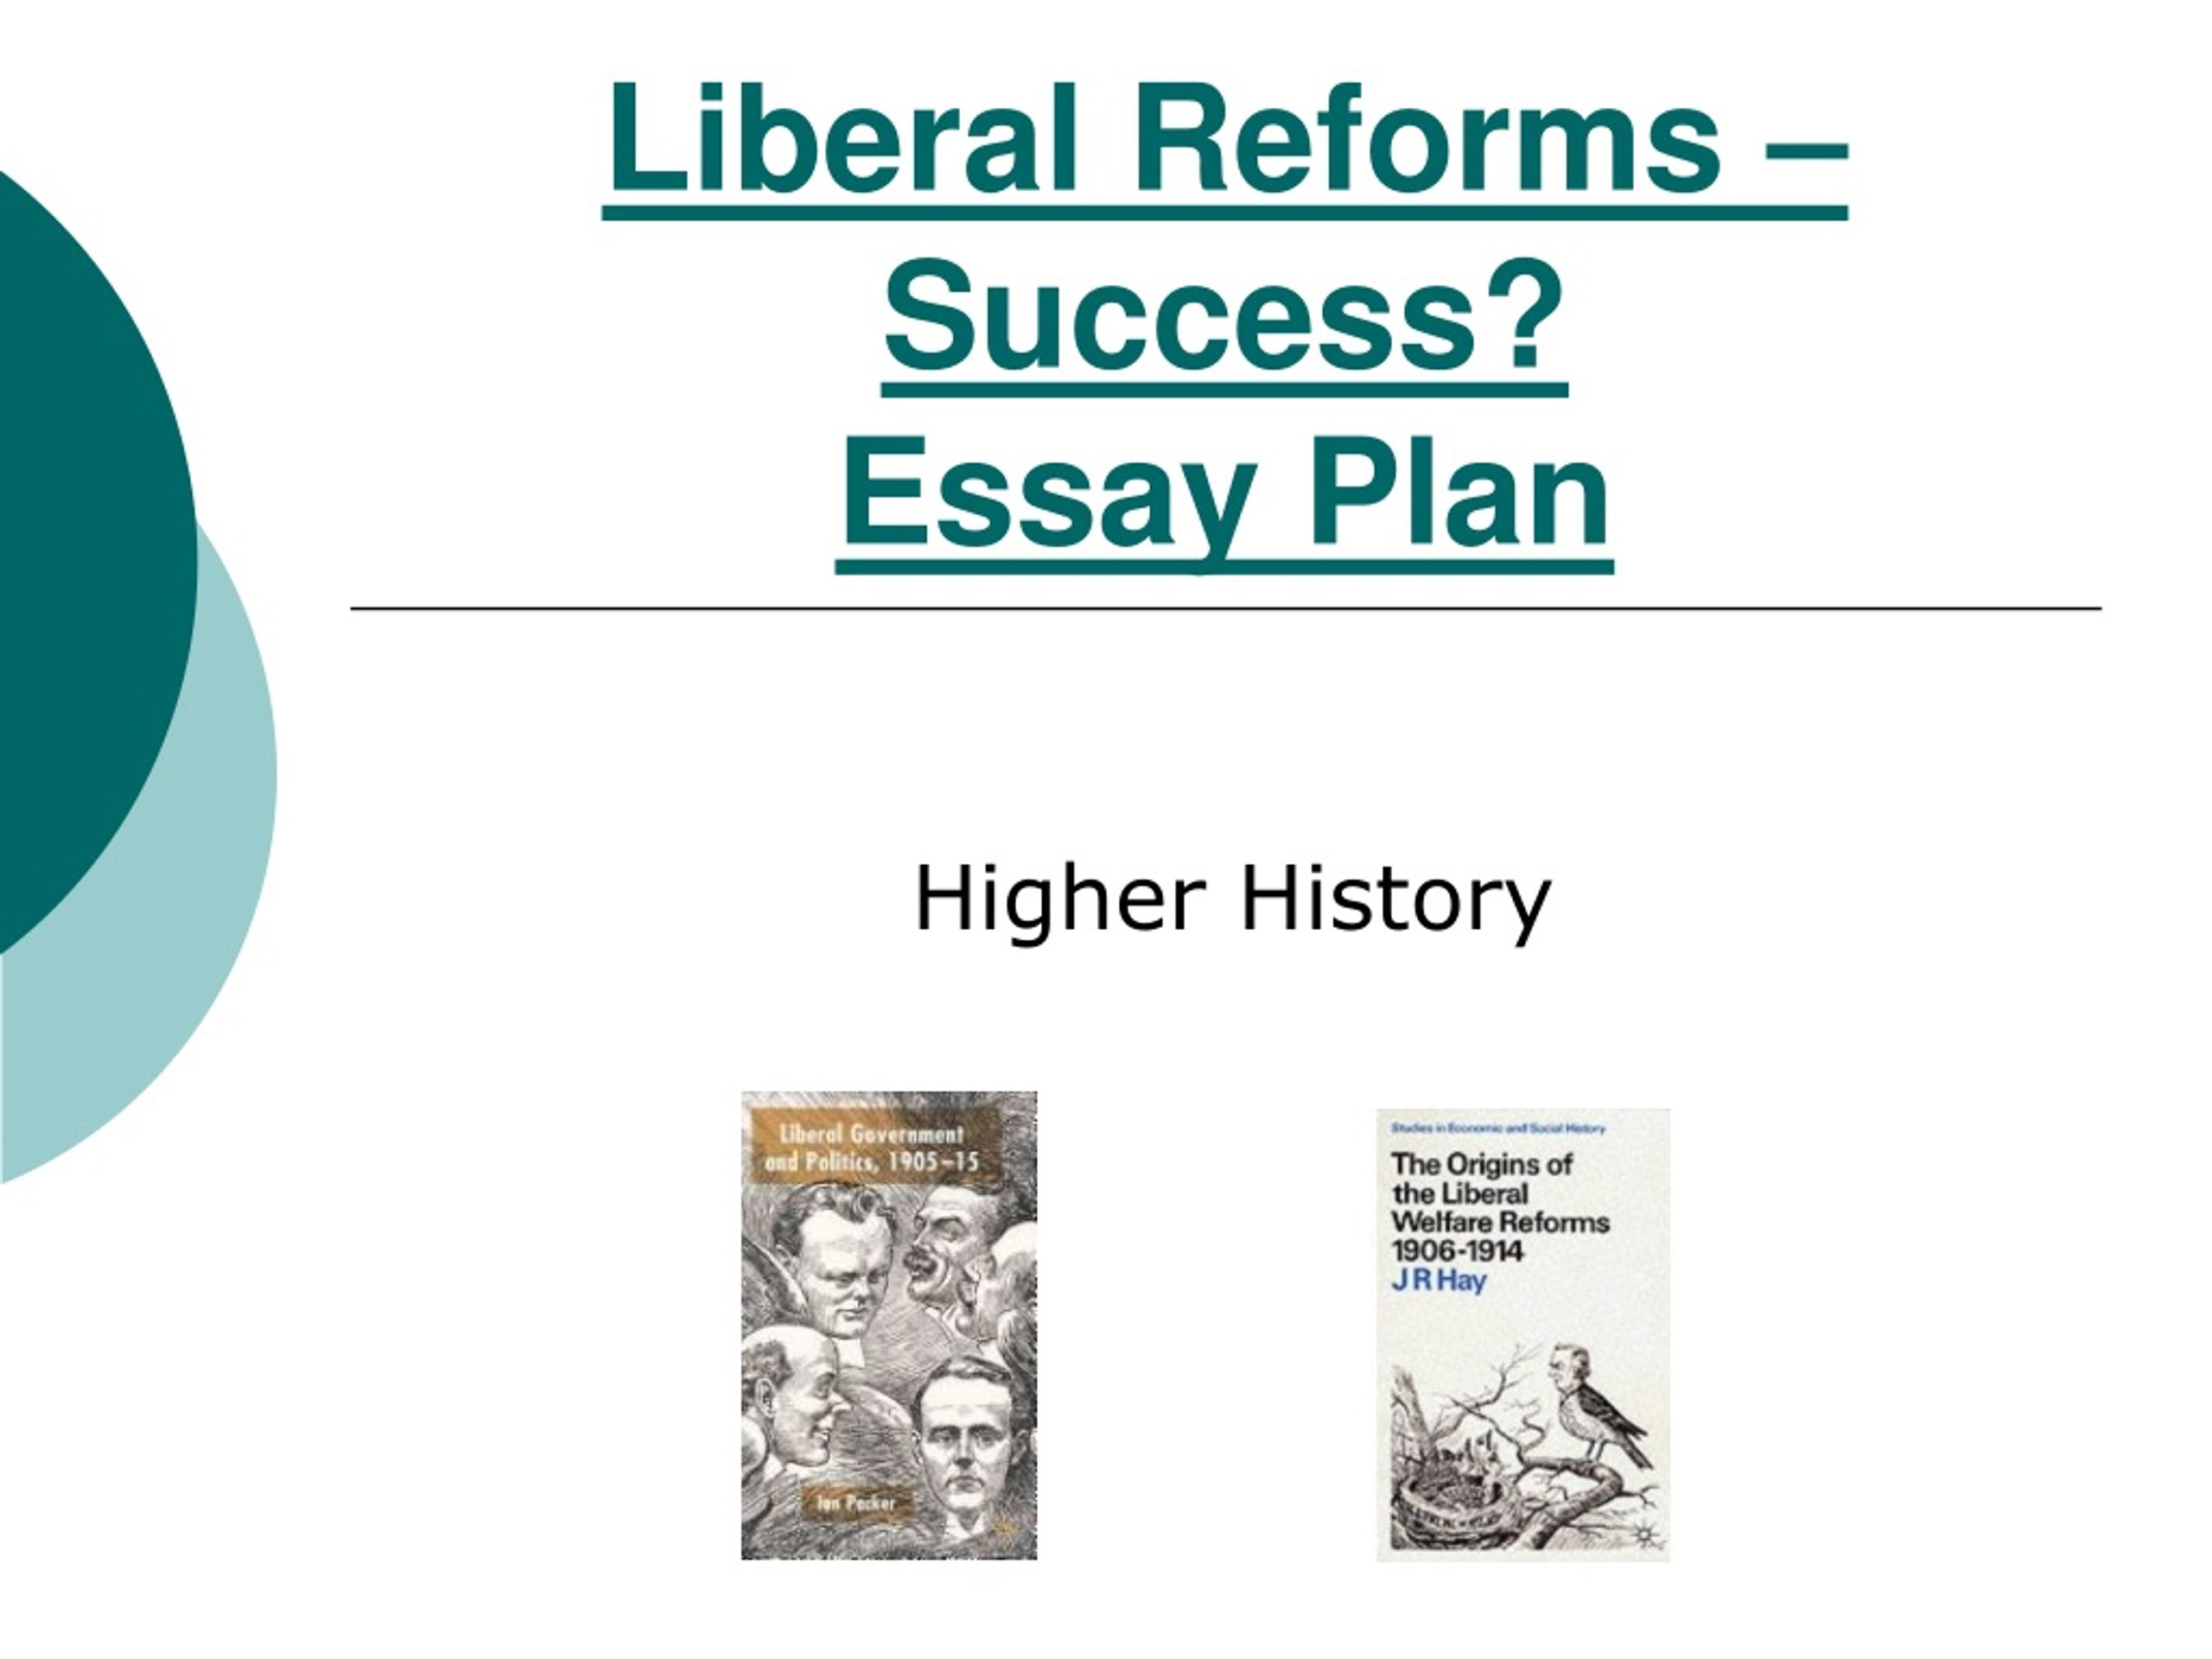 higher history why liberal reforms essay